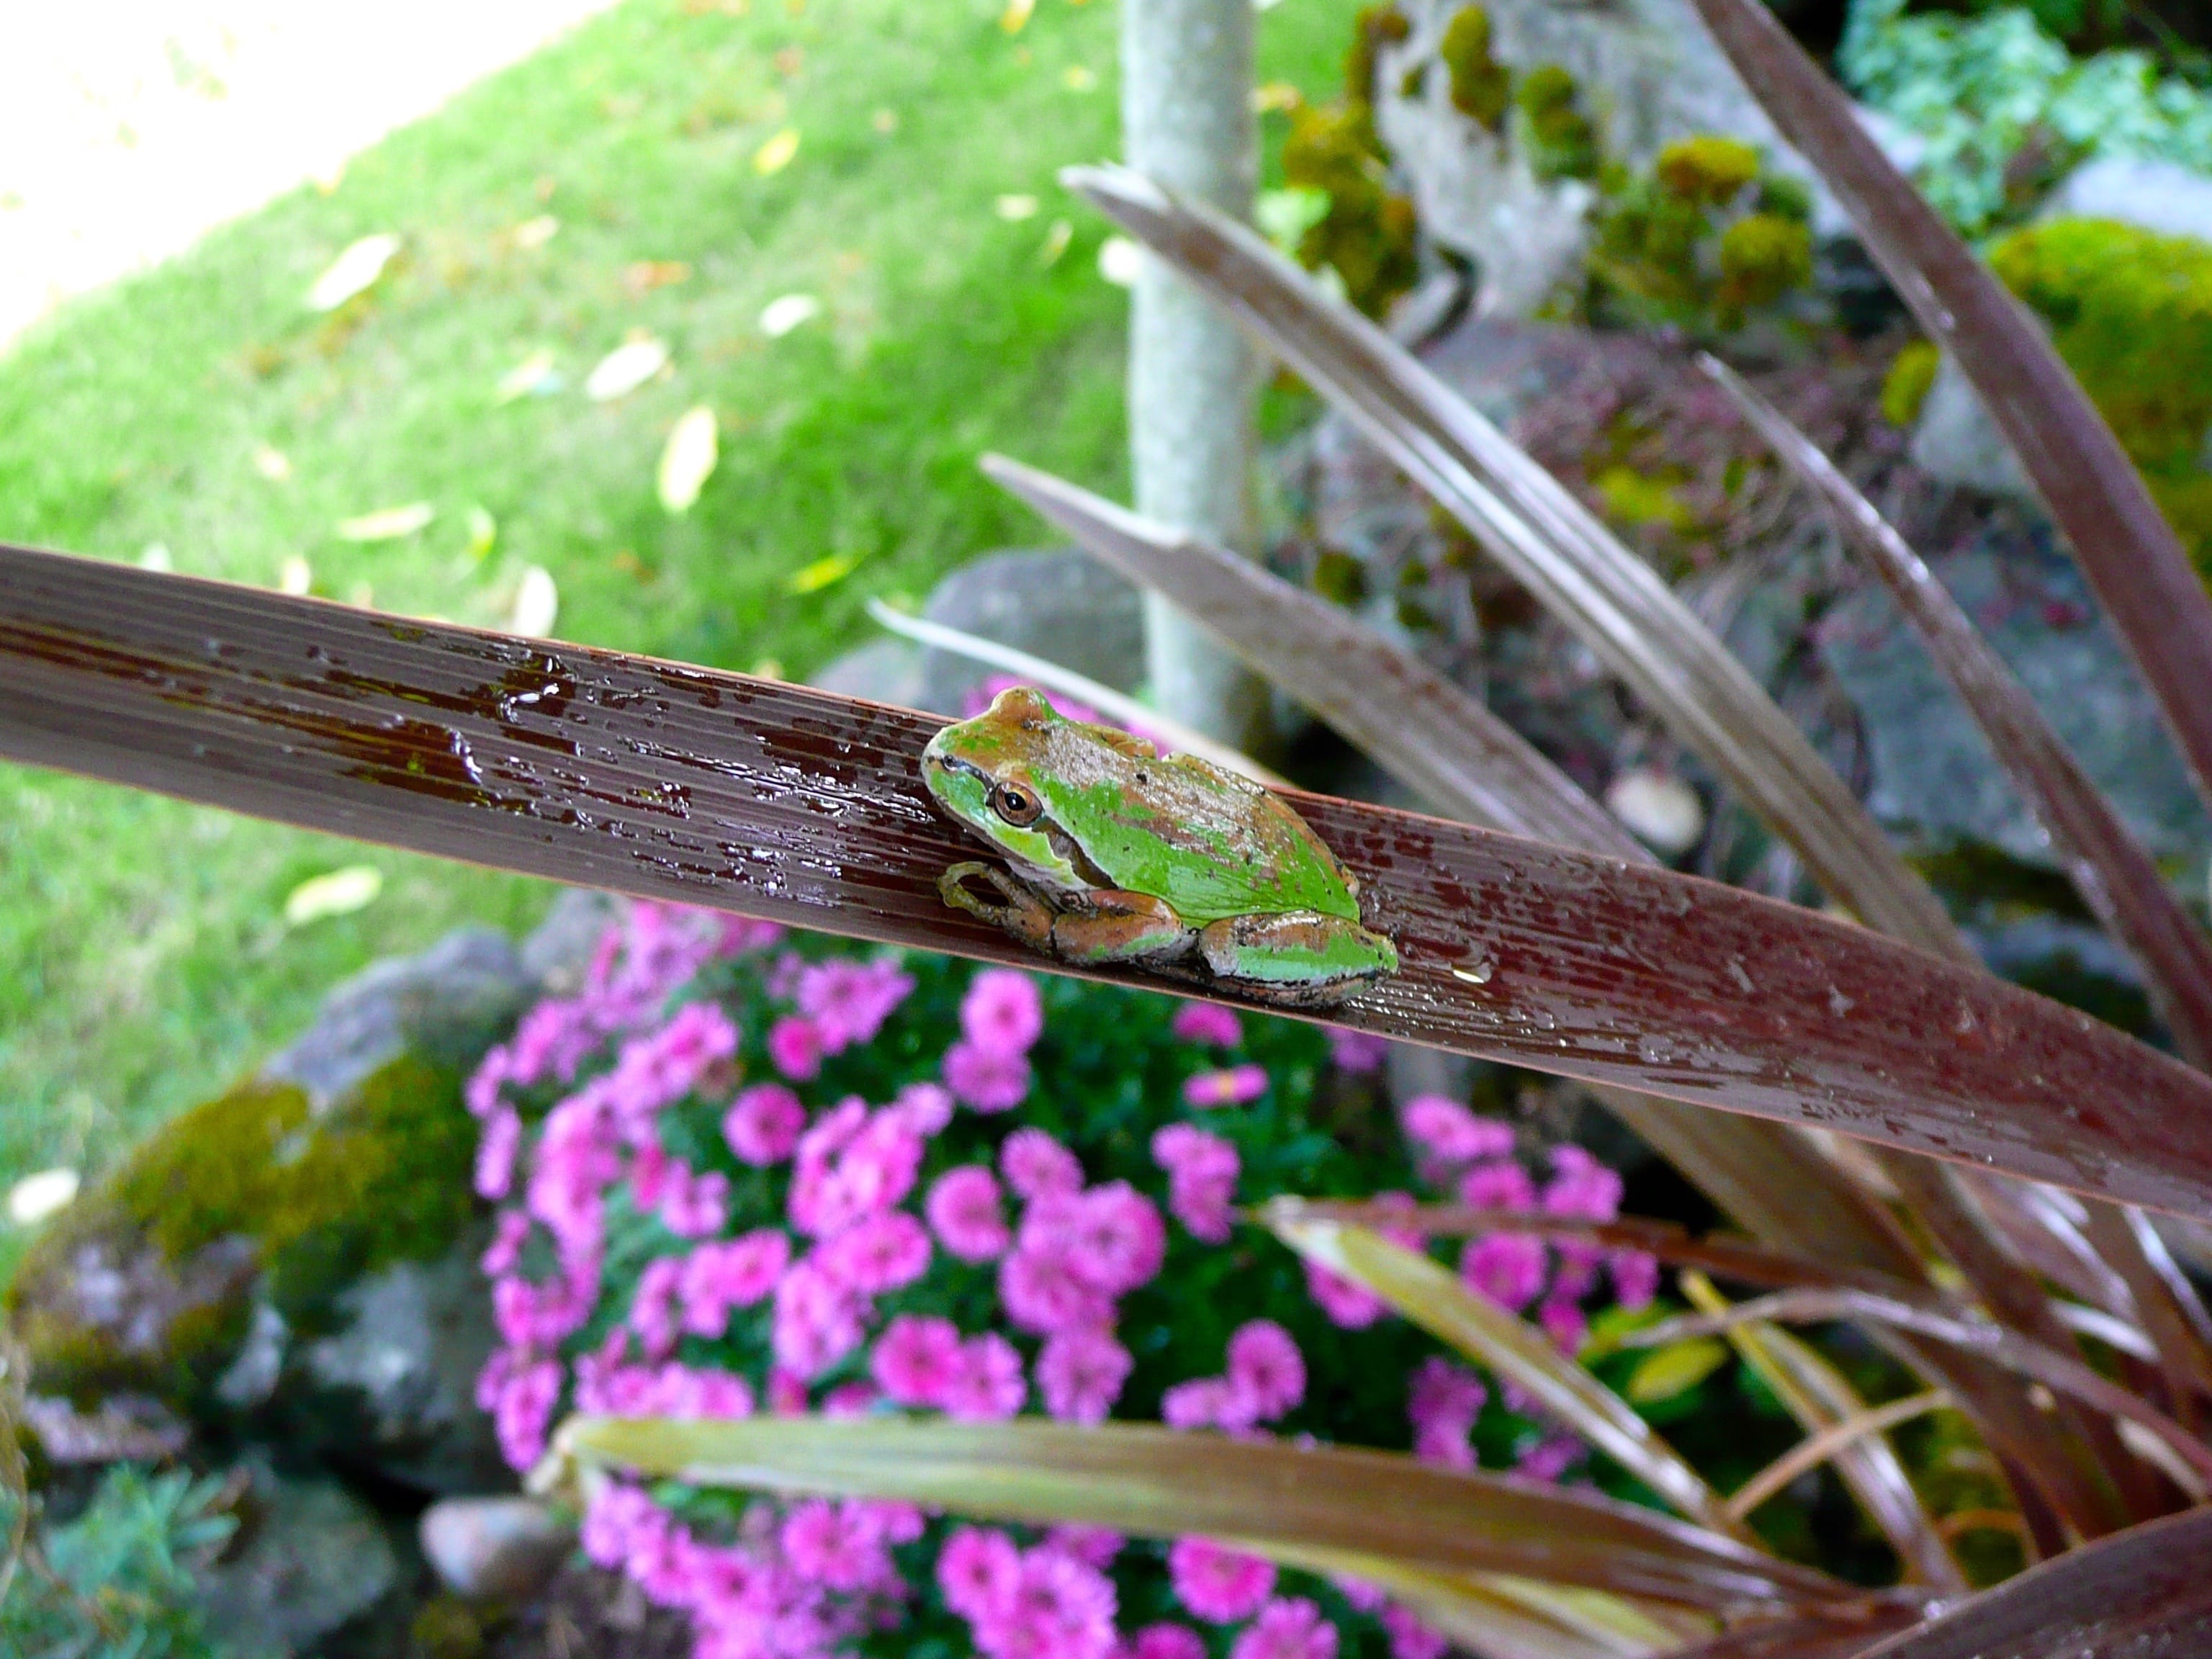 I was walking down the steps next to my garden when I just happened to see this small little one taking a break on the leaf of my plant. I ran back into the house to get my camera thinking that it would be gone by the time I returned. Fortunately, it was still there so I snapped this photo.